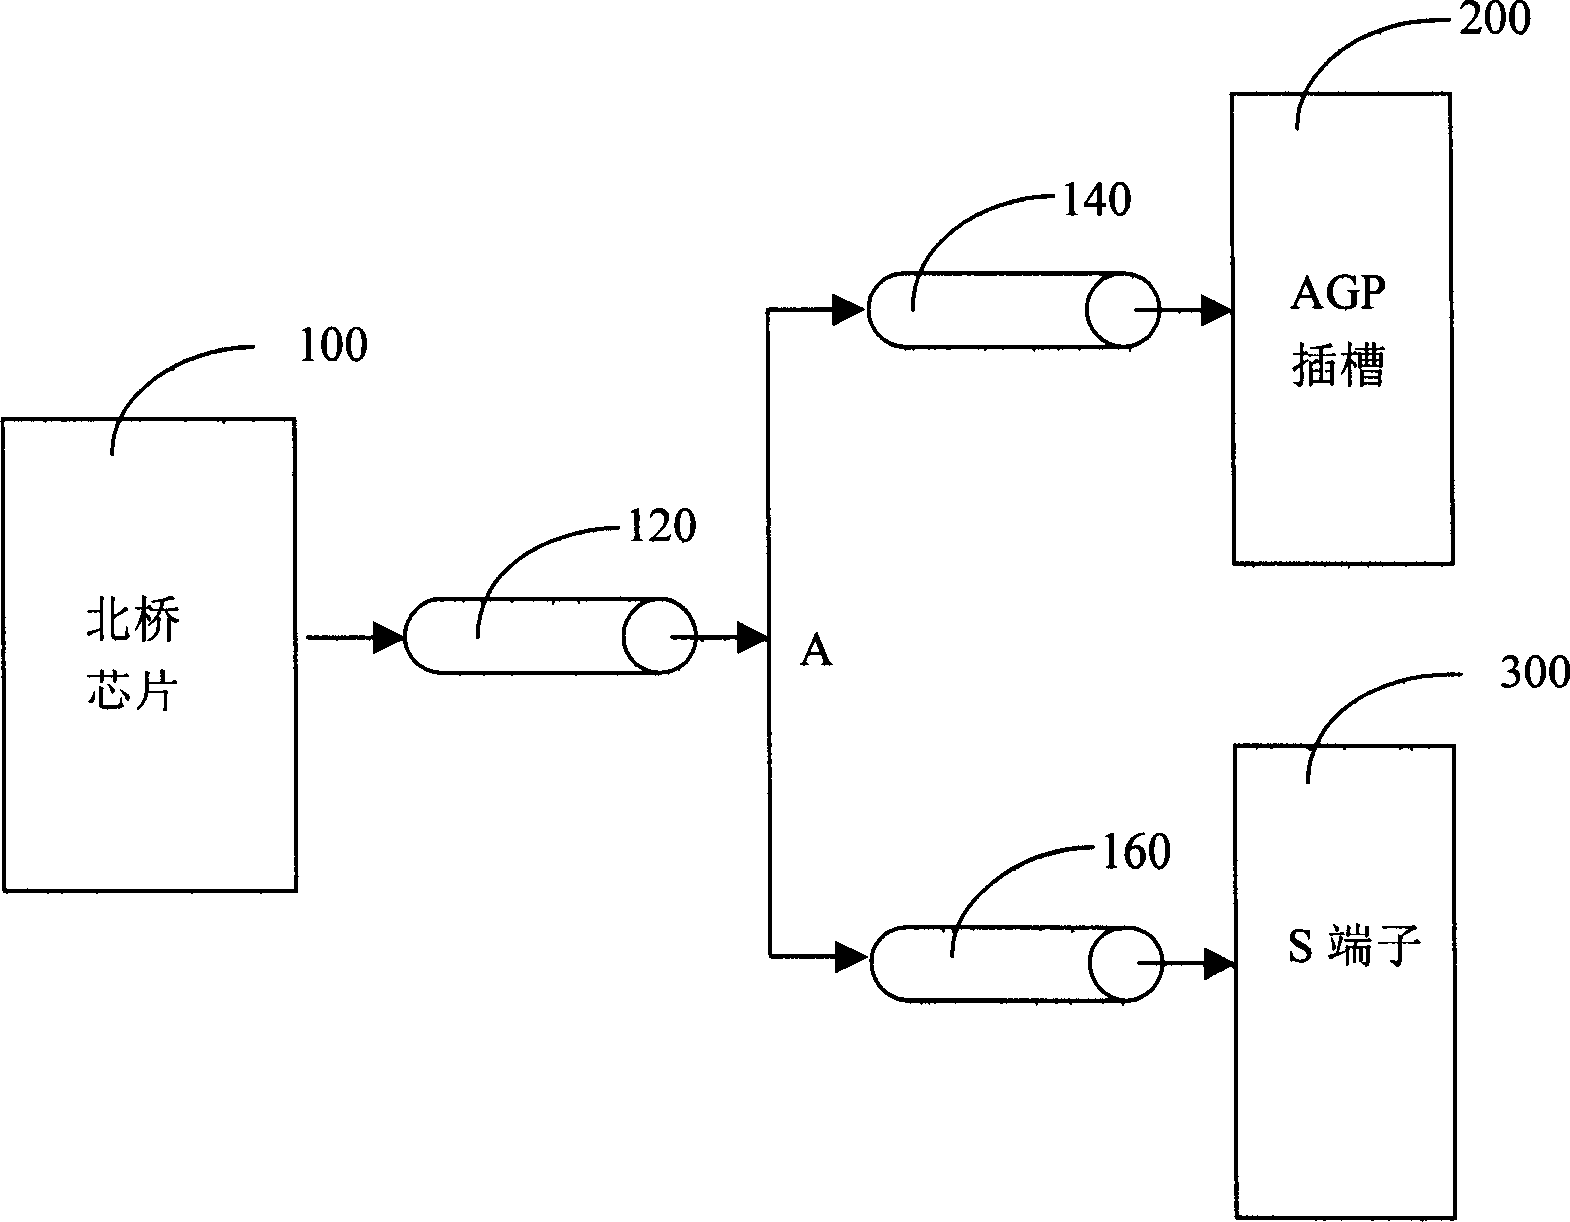 Wiring structure of transmission wire in high speed printed circuit board